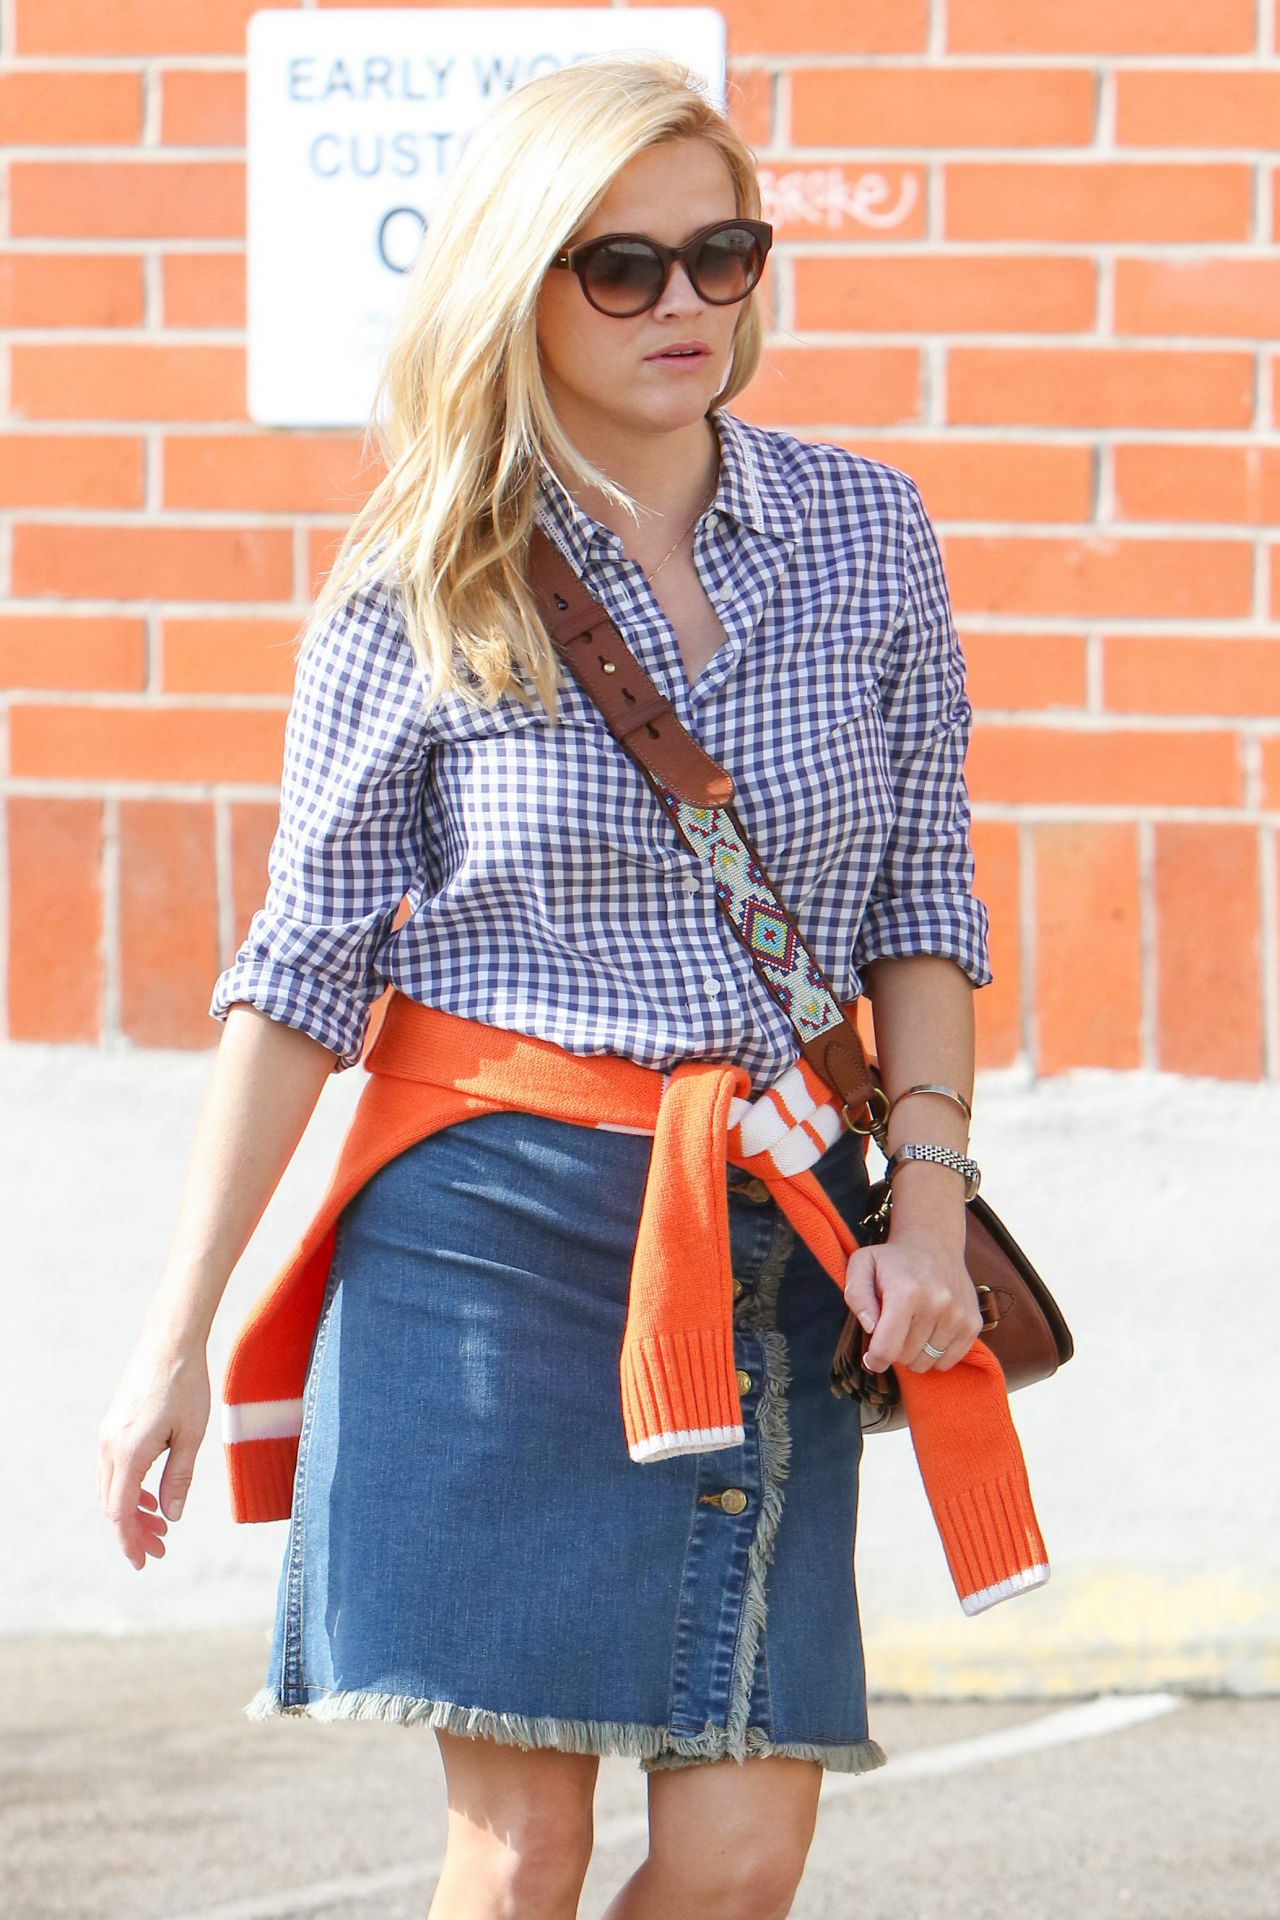 Reese Witherspoon Los Angeles January 13, 2019 – Star Style